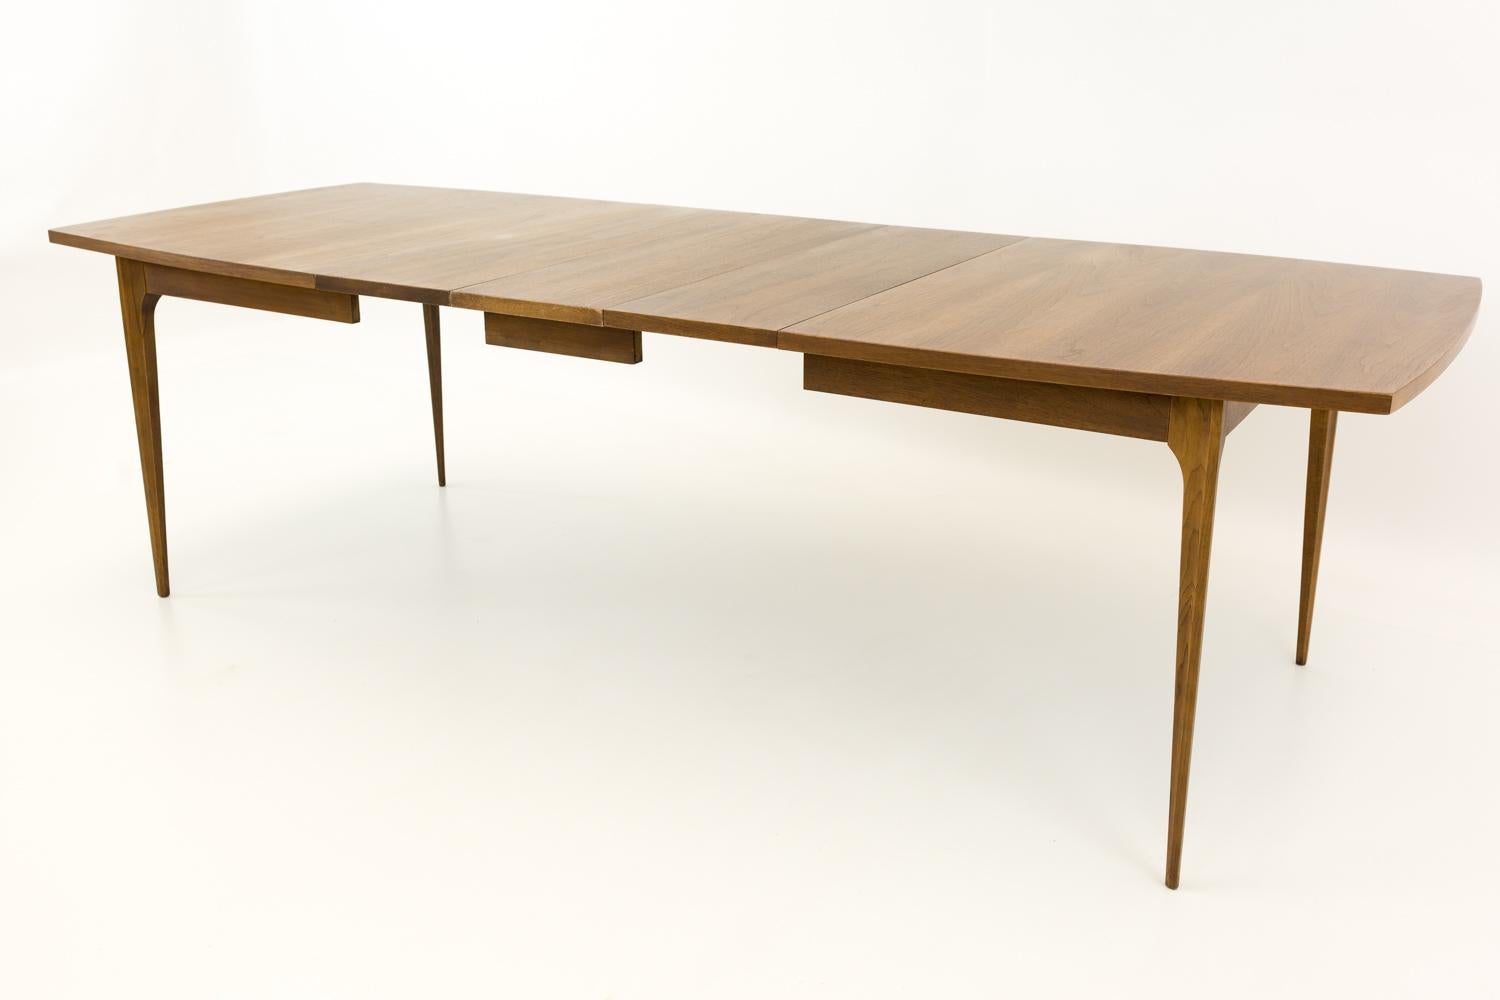 Broyhill Brasilia Mid Century 10 person rectangular dining table
Measures: 66.25 wide x 40.25 deep x 30 high. There are 3 leaves. Each leaf is 12 inches, allowing for a maximum table length of 102.25 inches.

All pieces of furniture can be had in